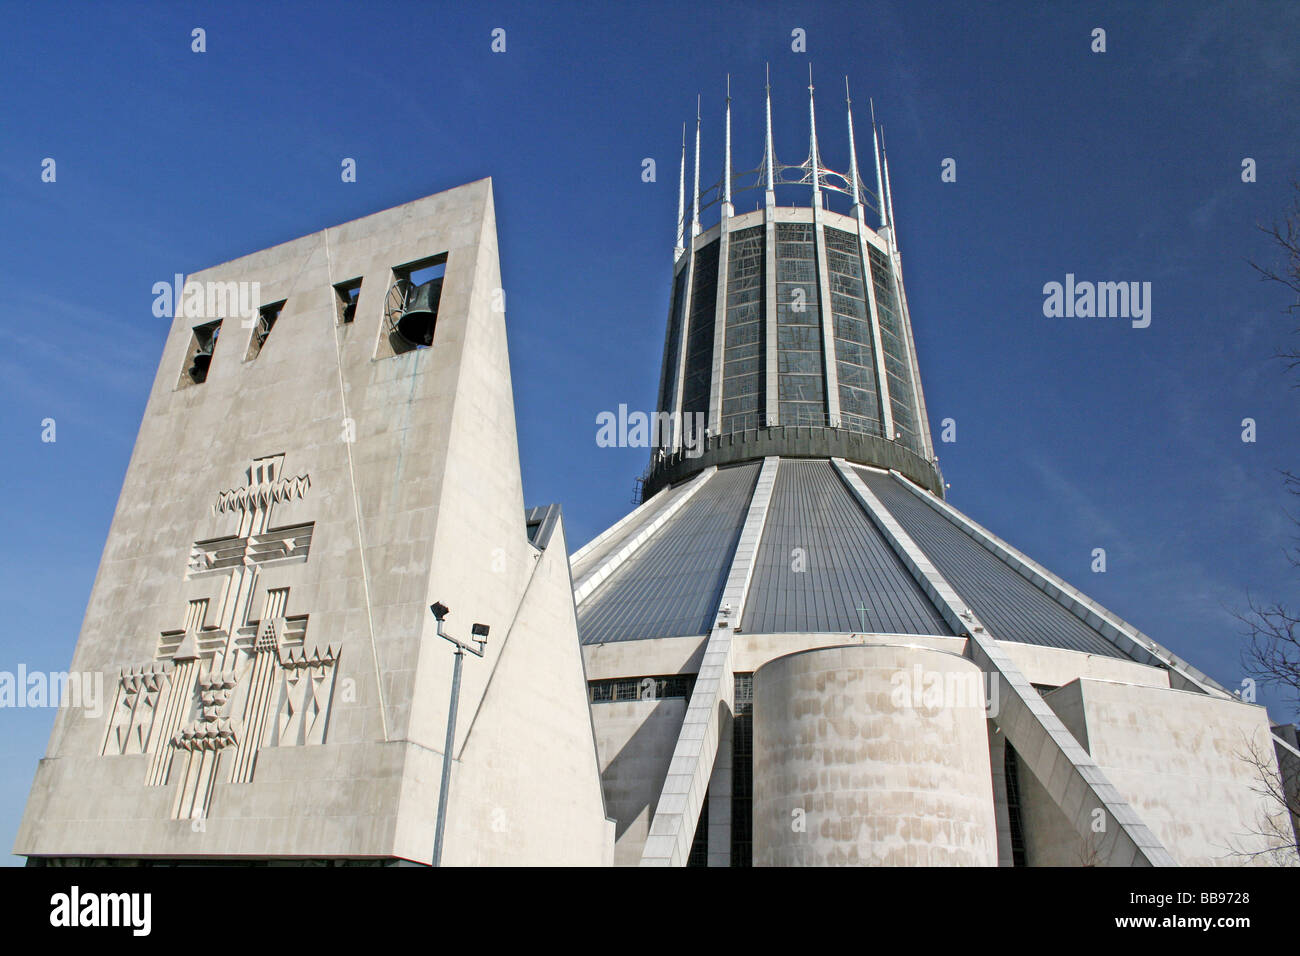 The Bells And Spire Of The Liverpool Metropolitan Cathedral of Christ the King, Merseyside, UK Stock Photo